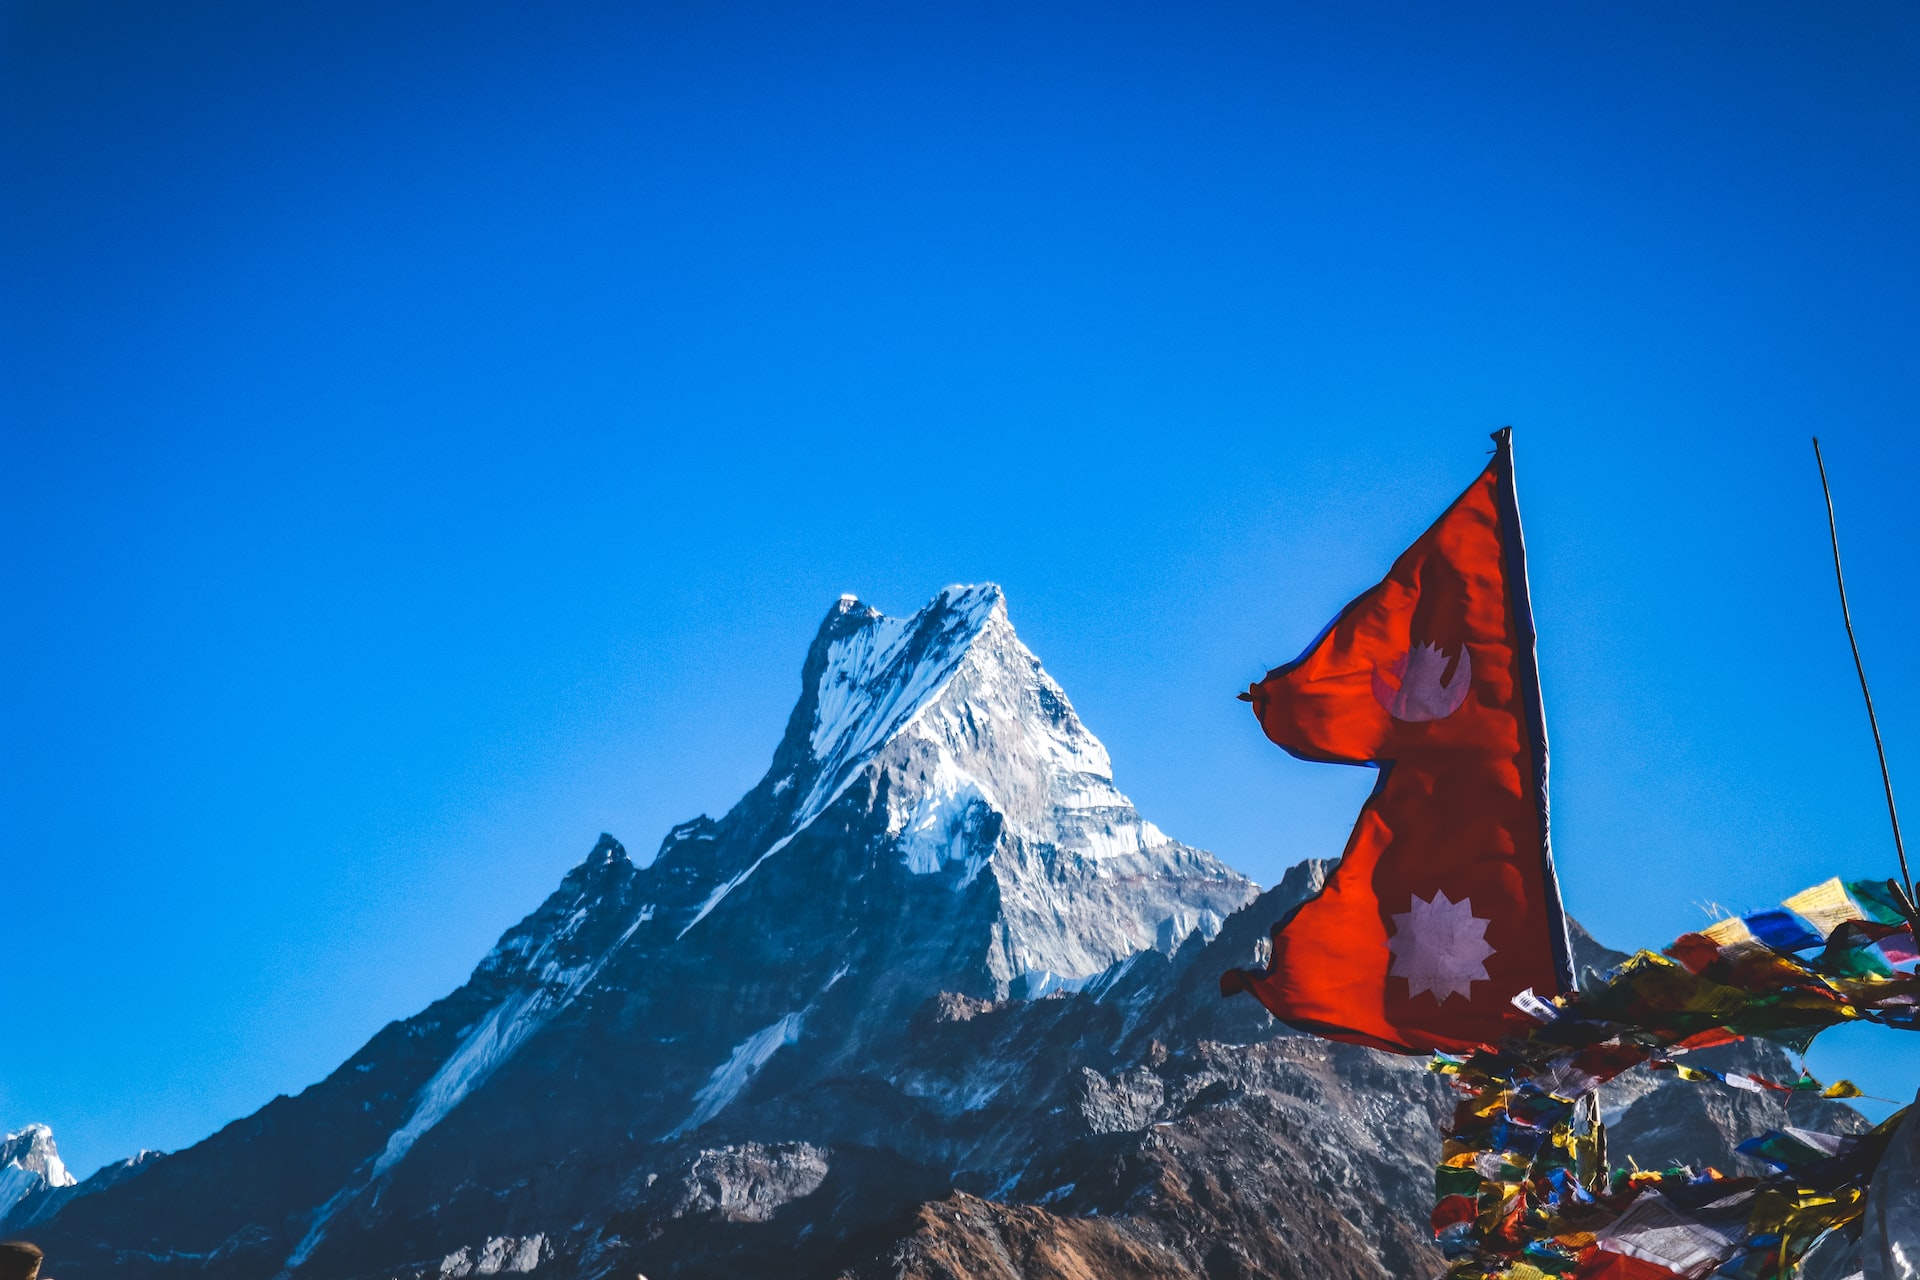 12 Major Attractions of Nepal